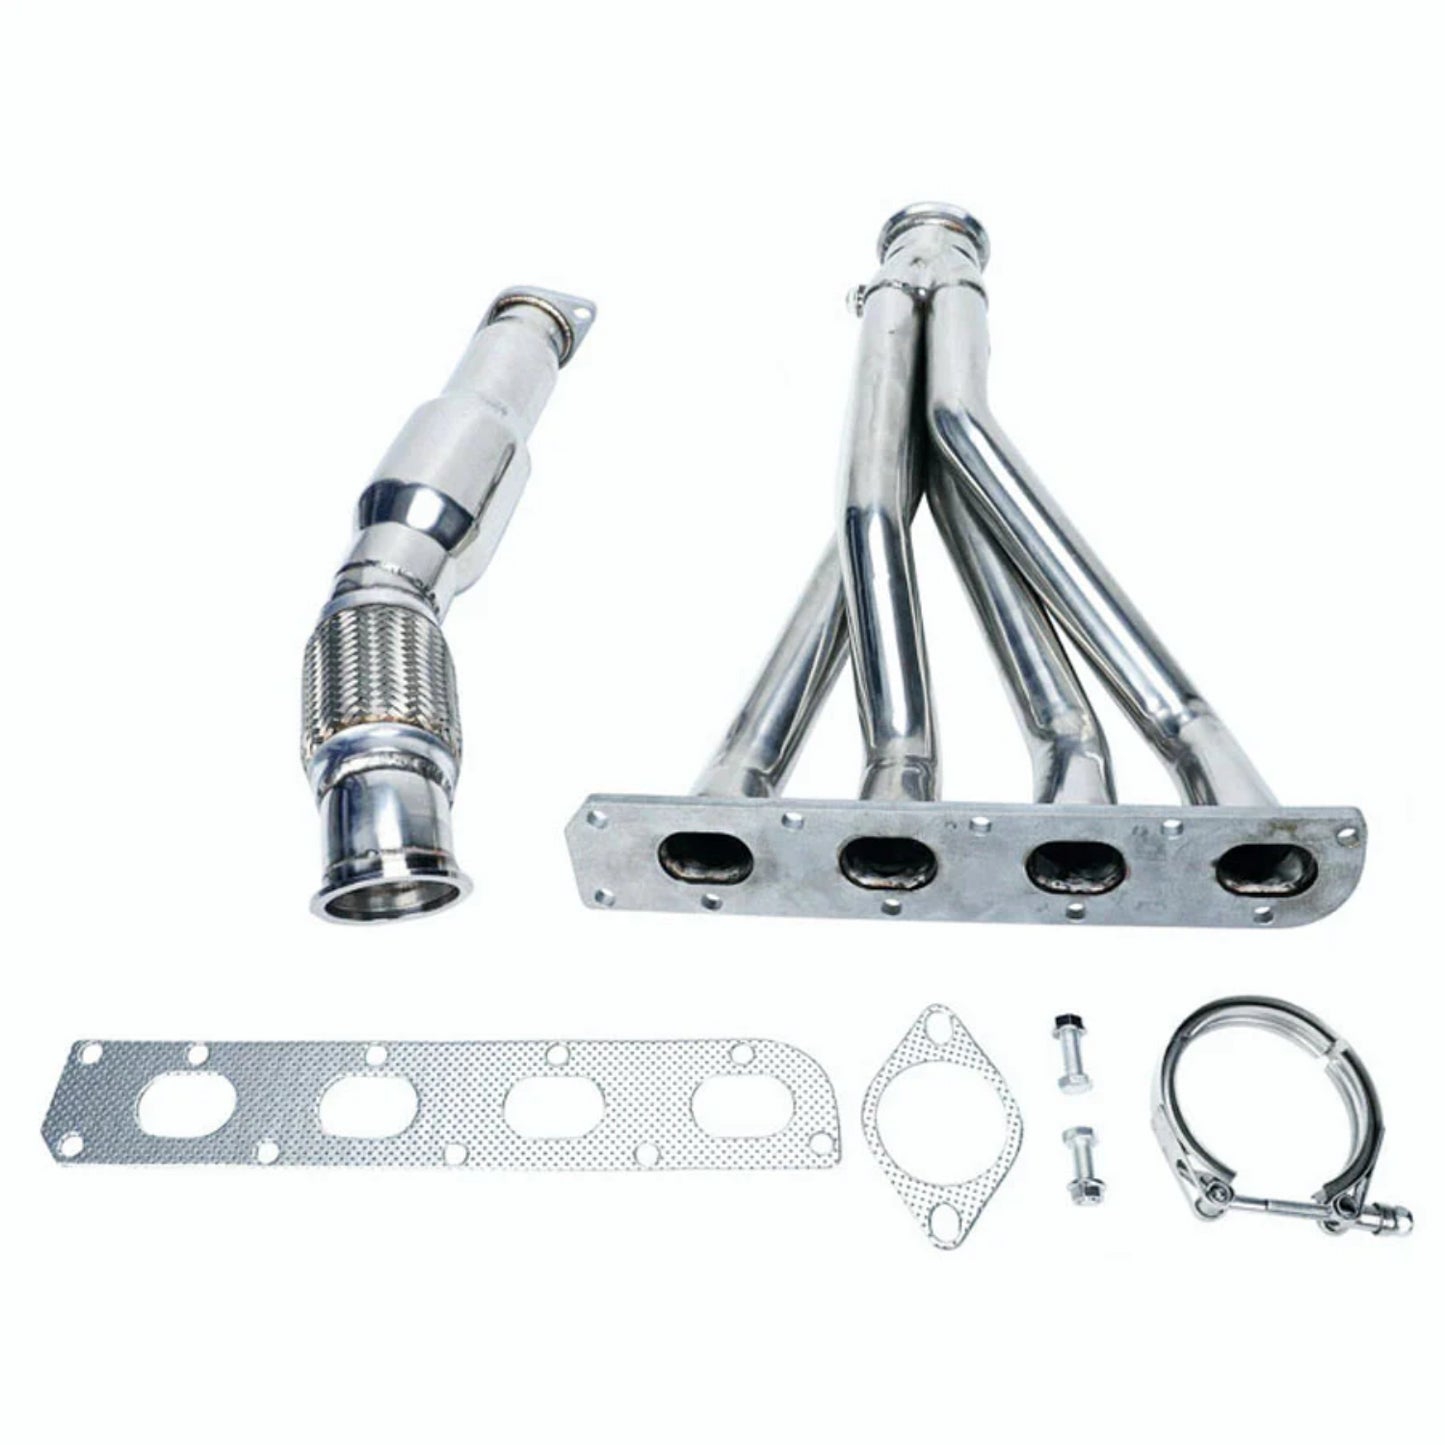 Exhaust Manifold Header for 2005-2007 Chevy Cobalt and 2004-2007 Saturn ION 2.0L